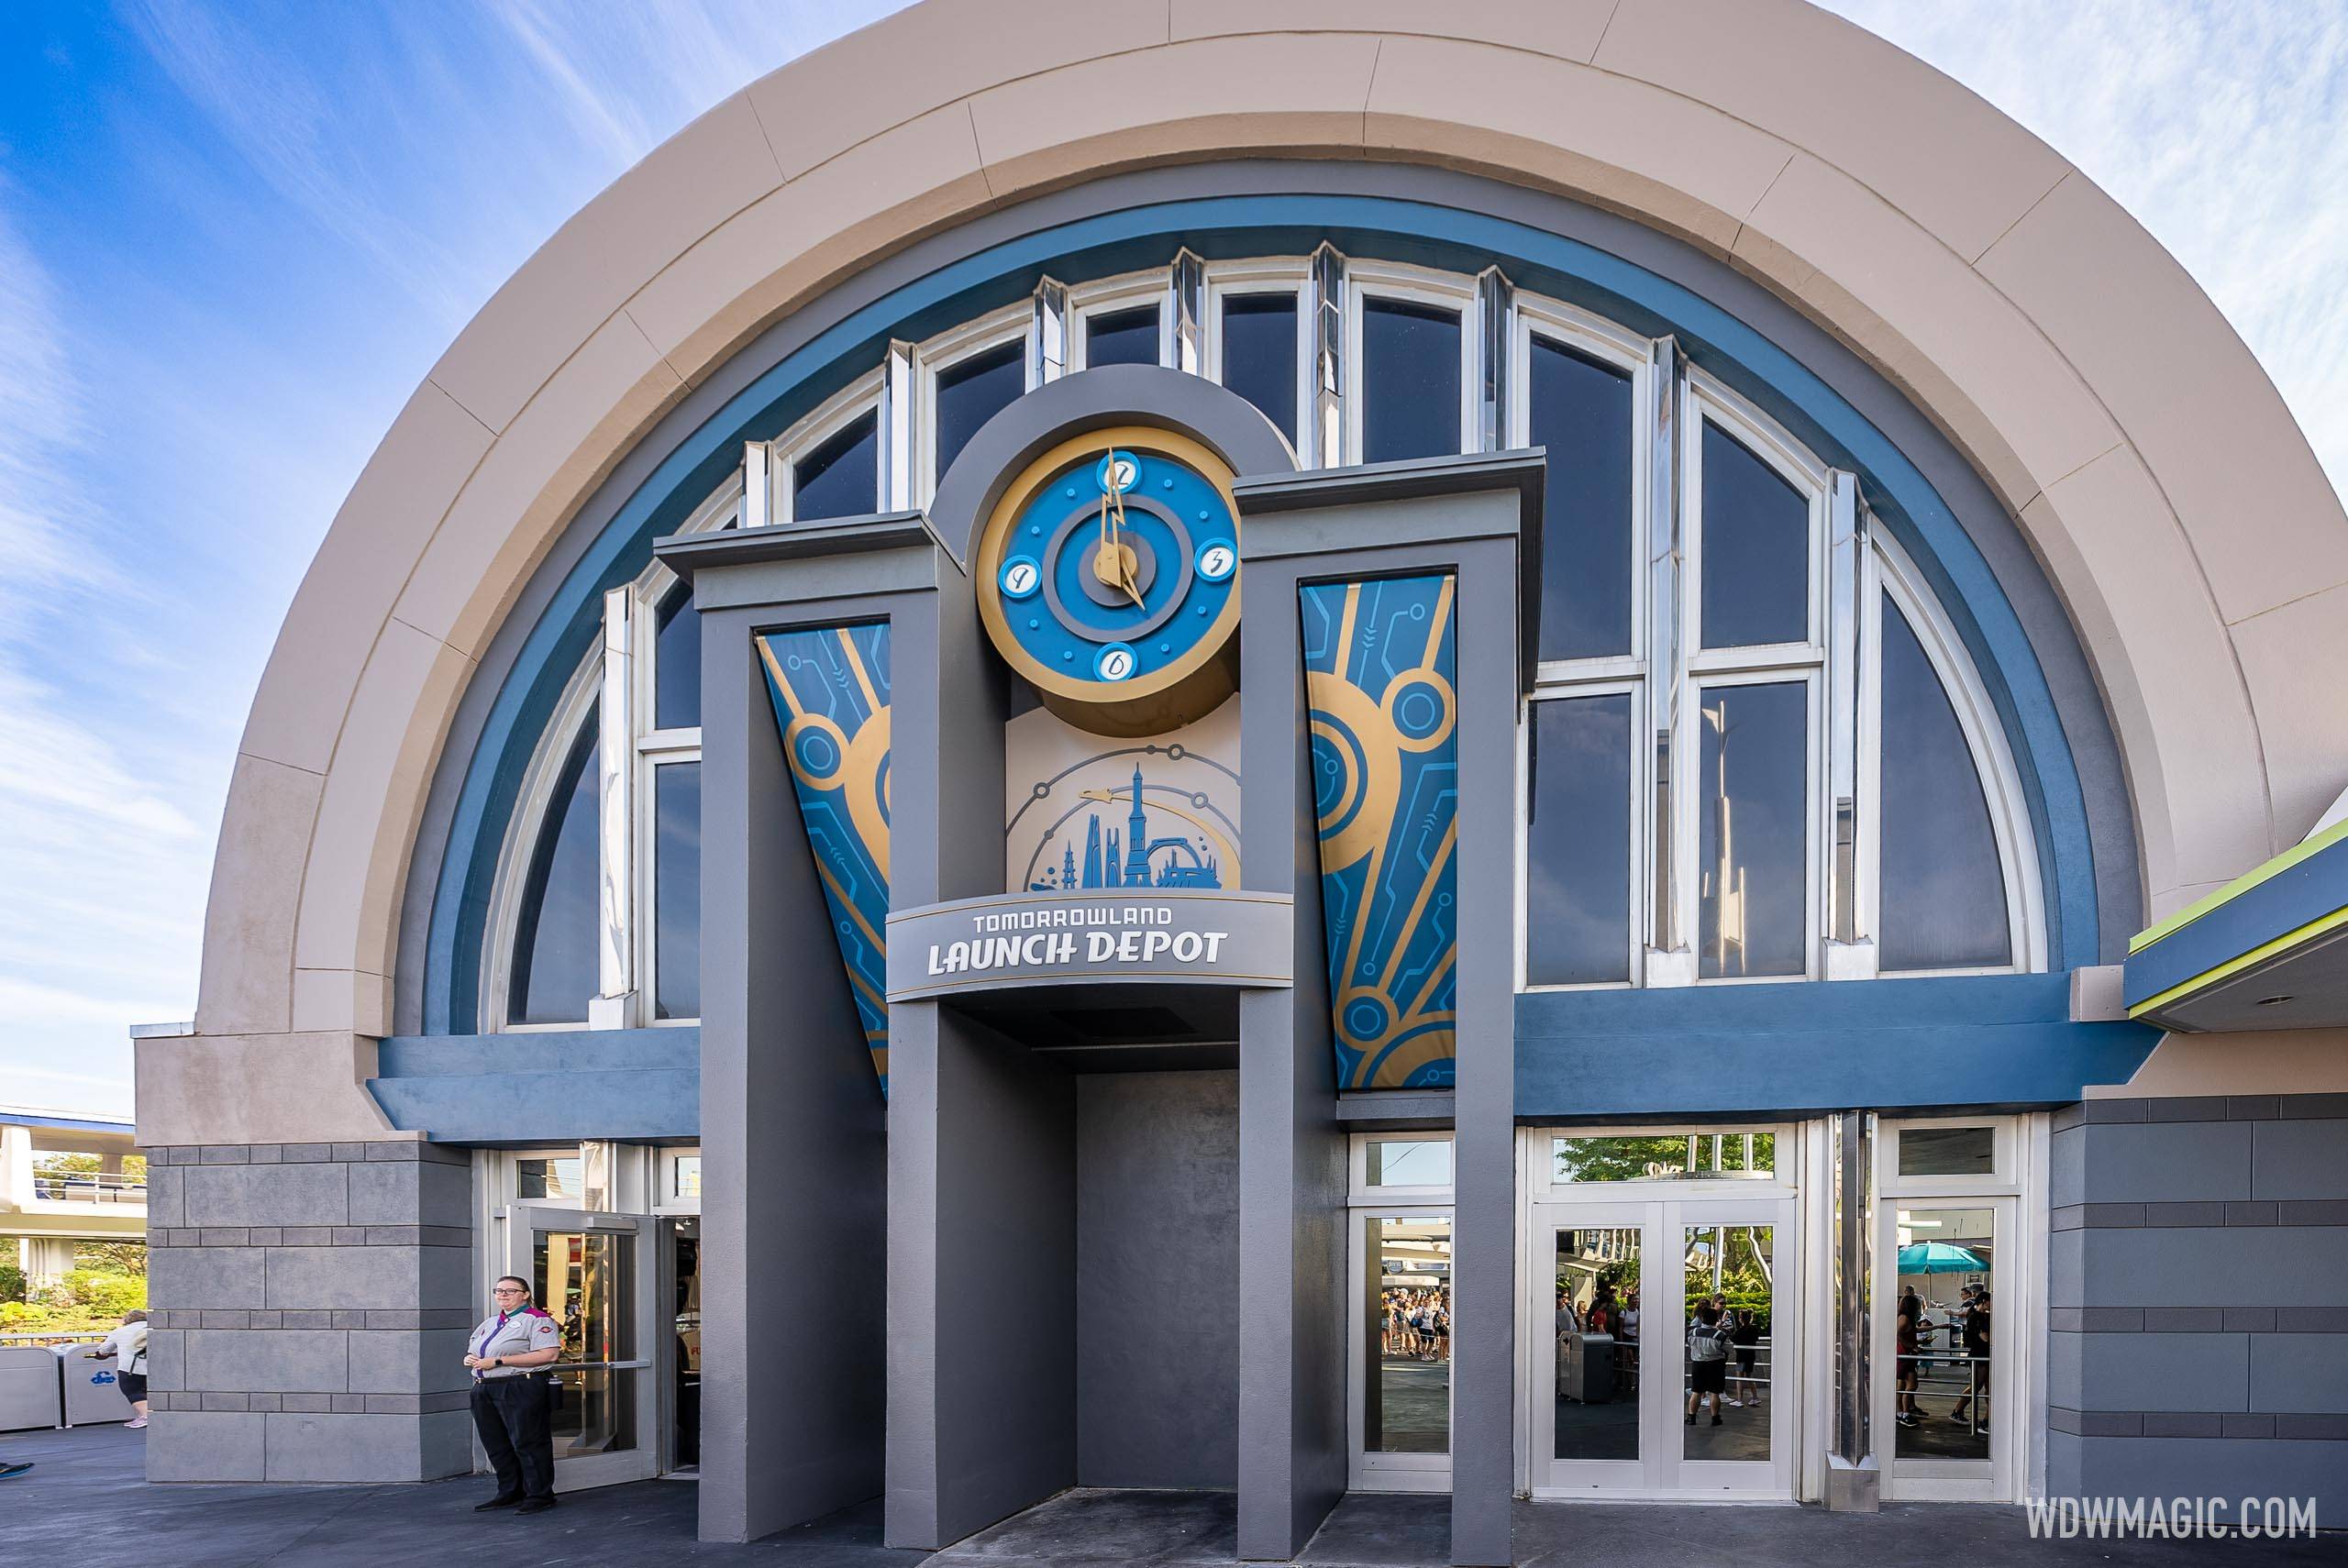 A look inside the new Tomorrowland Launch Depot home of TRON merchandise at Magic Kingdom